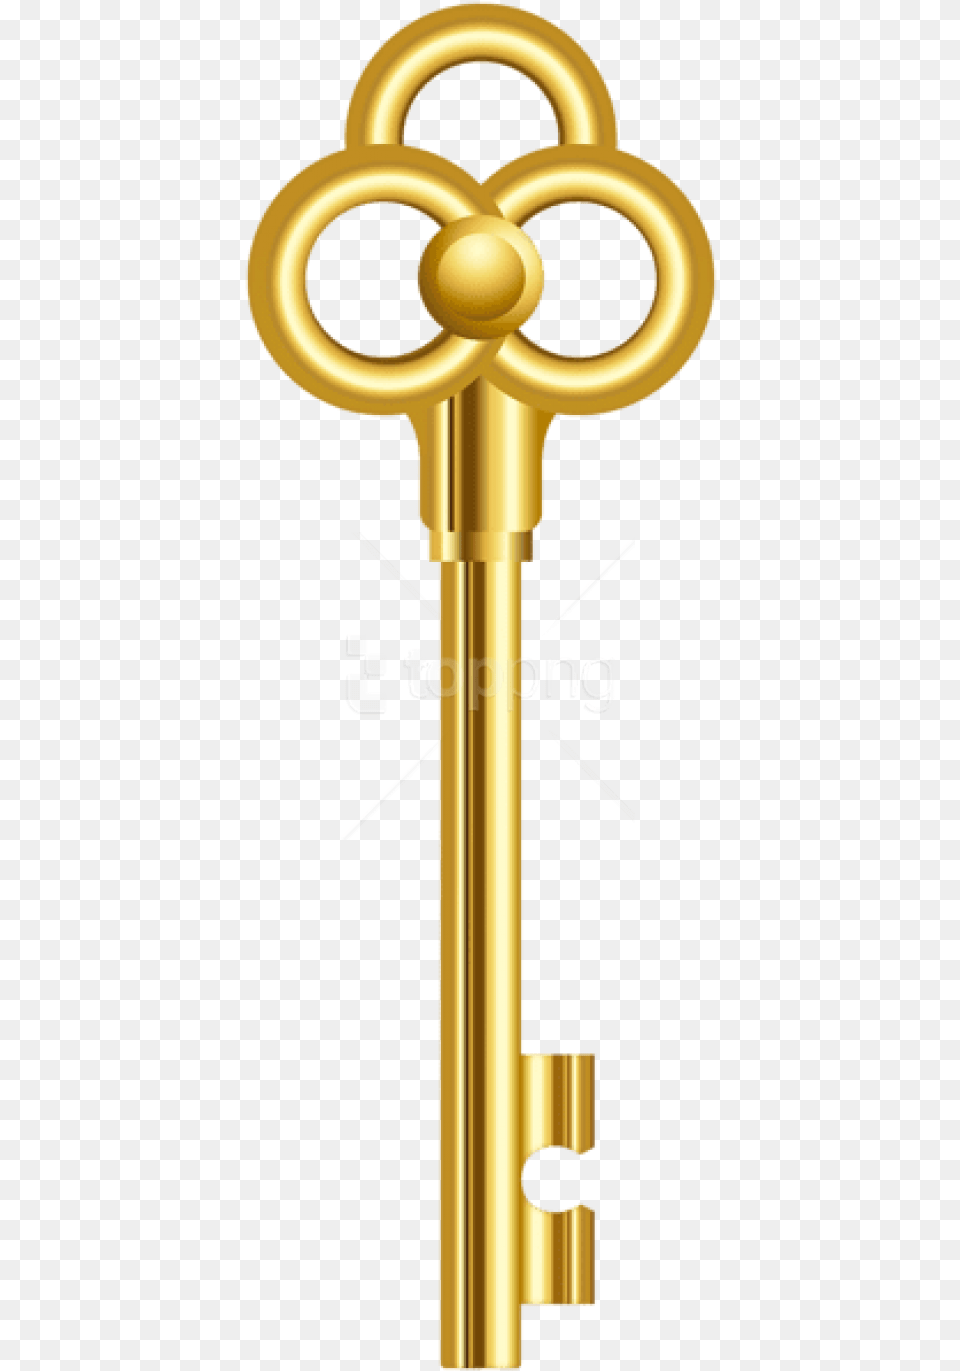 Gold Key Clipart Photo Images Gold Key, Smoke Pipe Free Png Download